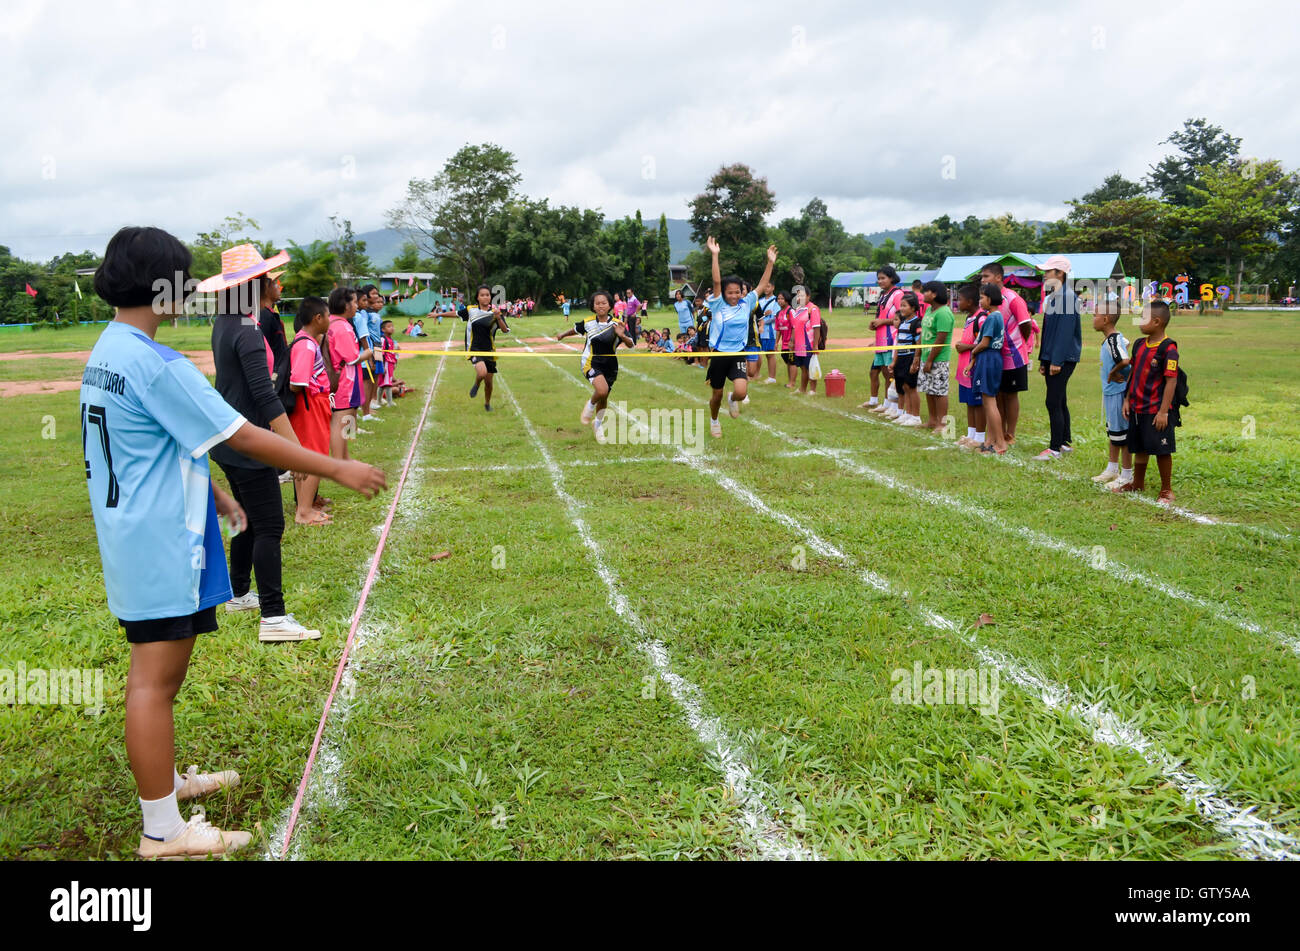 PHITSANULOK, THAILAND - SEP 1: Compete on 100 Meter Dash Final for children on Sep 1, 2016 at chumchon wat bandong school in Phi Stock Photo